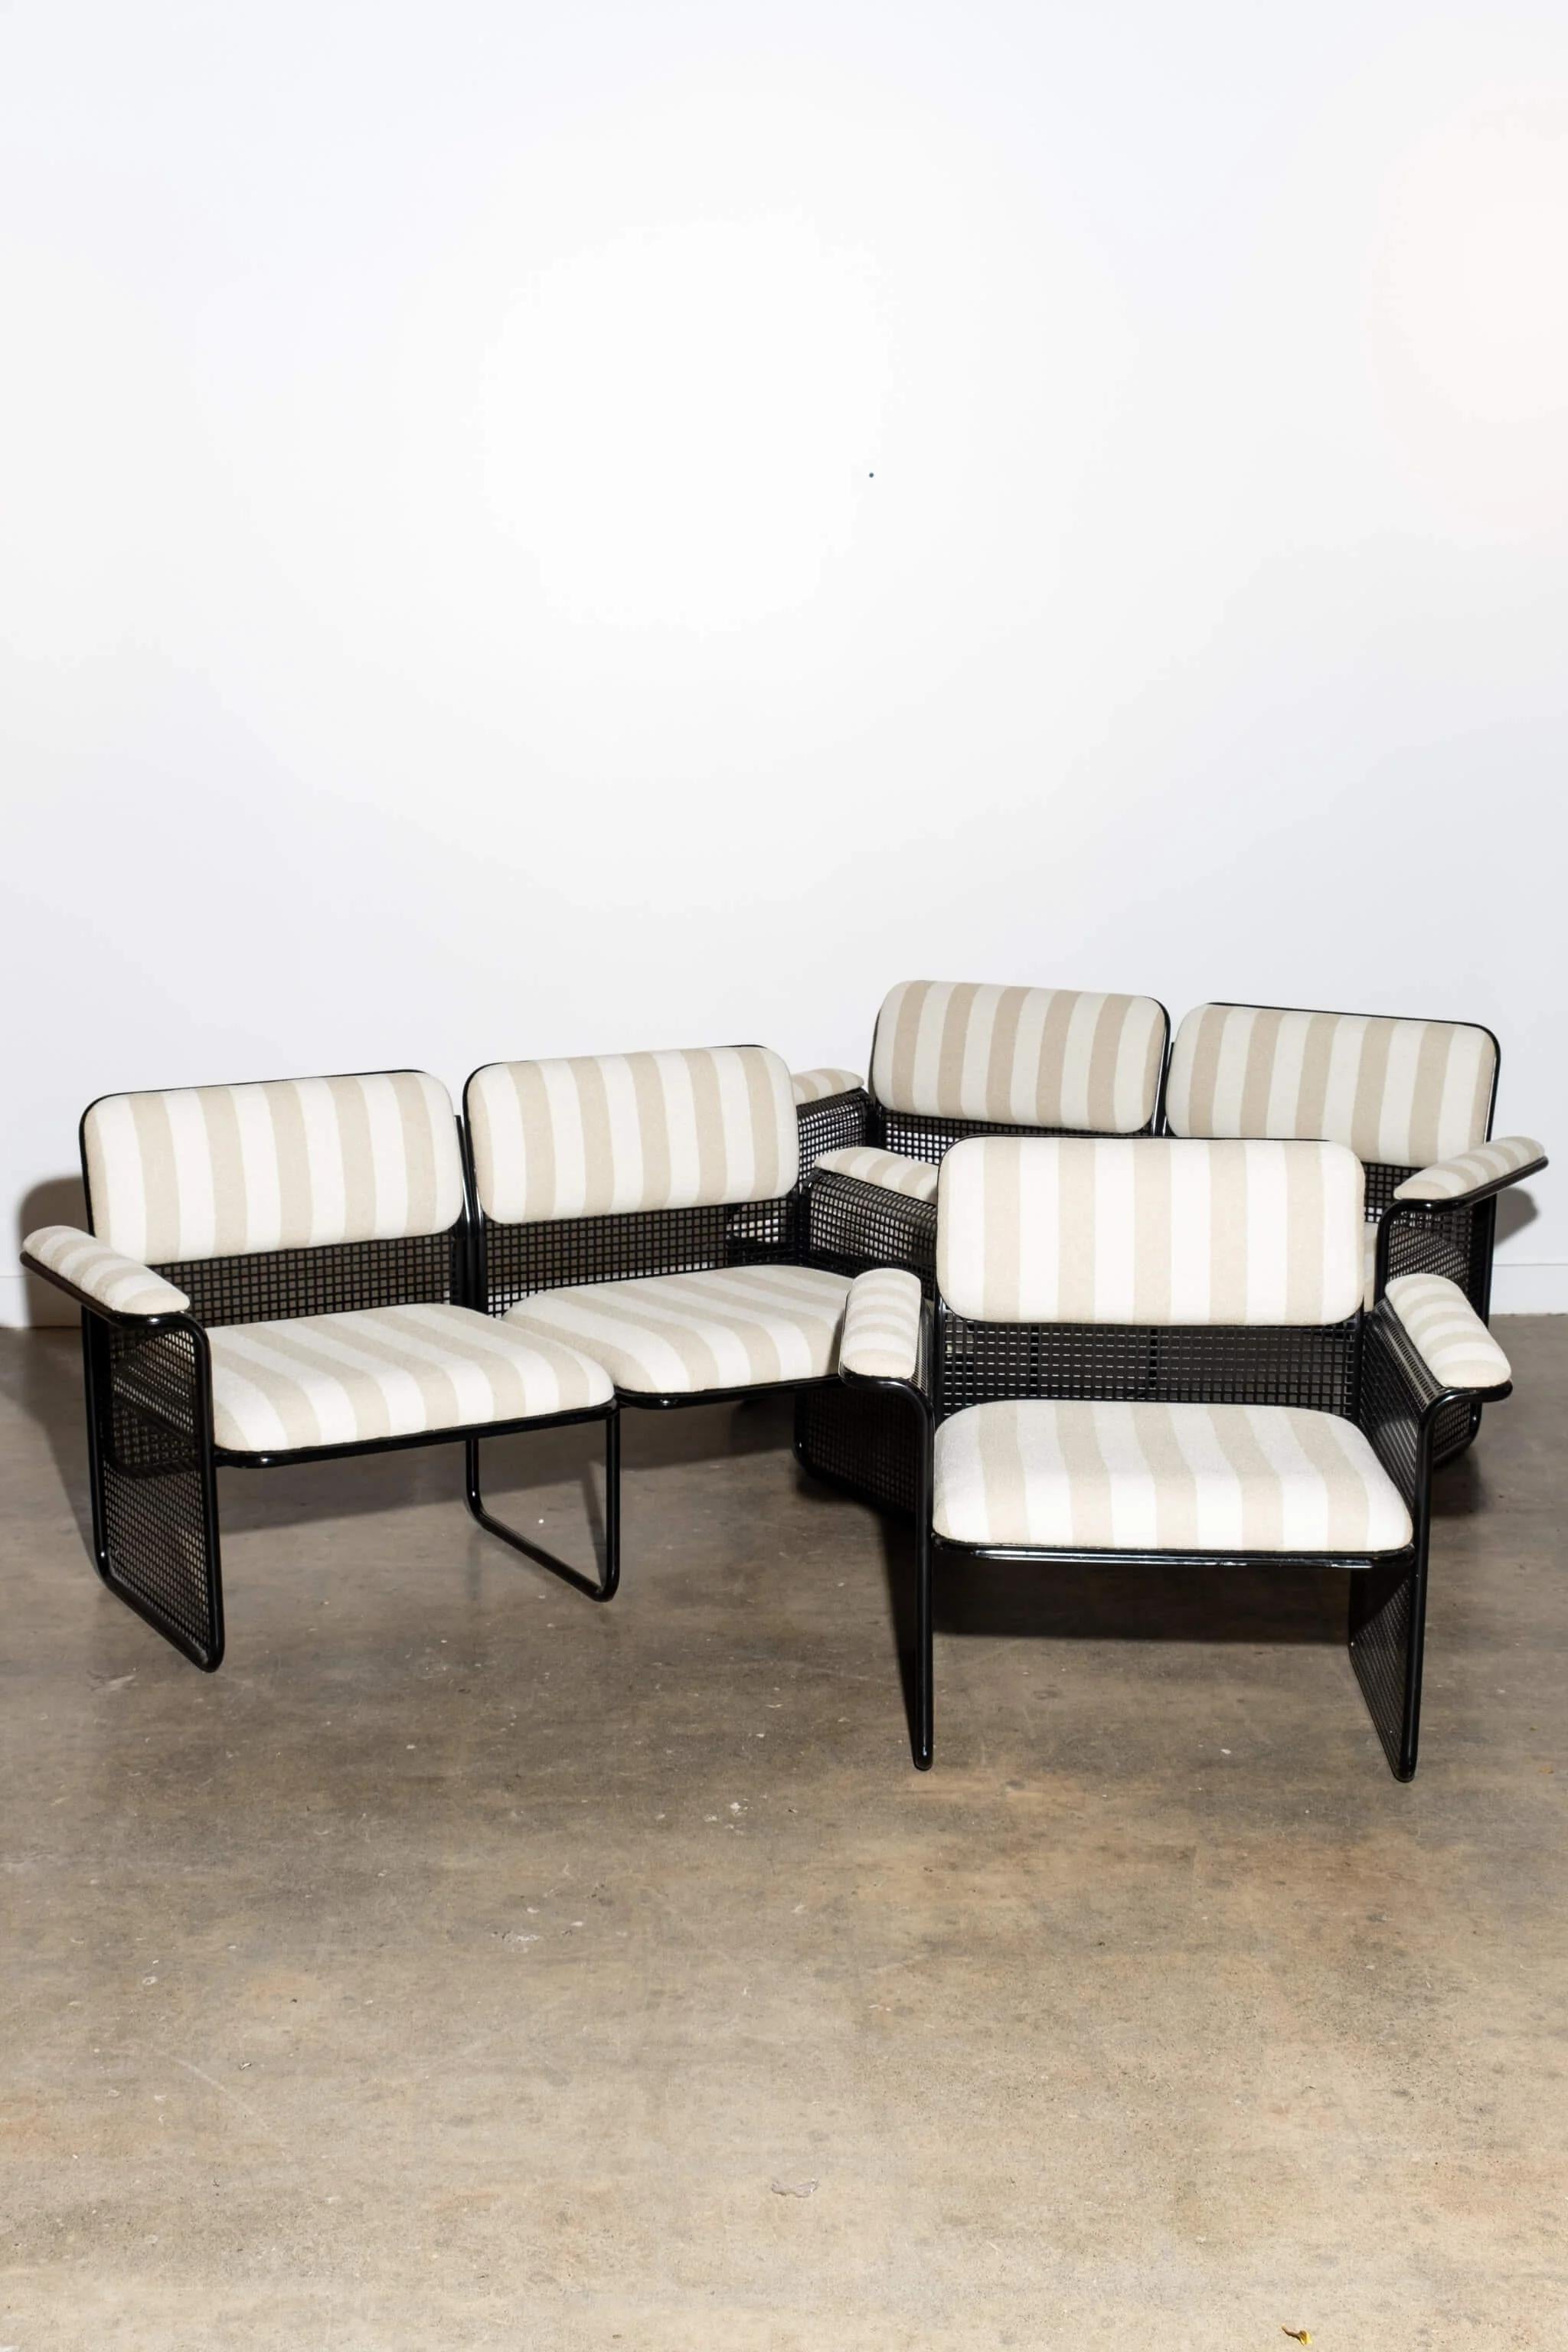 3-piece Italian Solarium Seating Set of black wire mesh, newly reupholstered in a grey and white Kvadrat Acca Stripe. The 1970s set includes two 2-seater sofas and a single armchair.

2-seater: 56.5